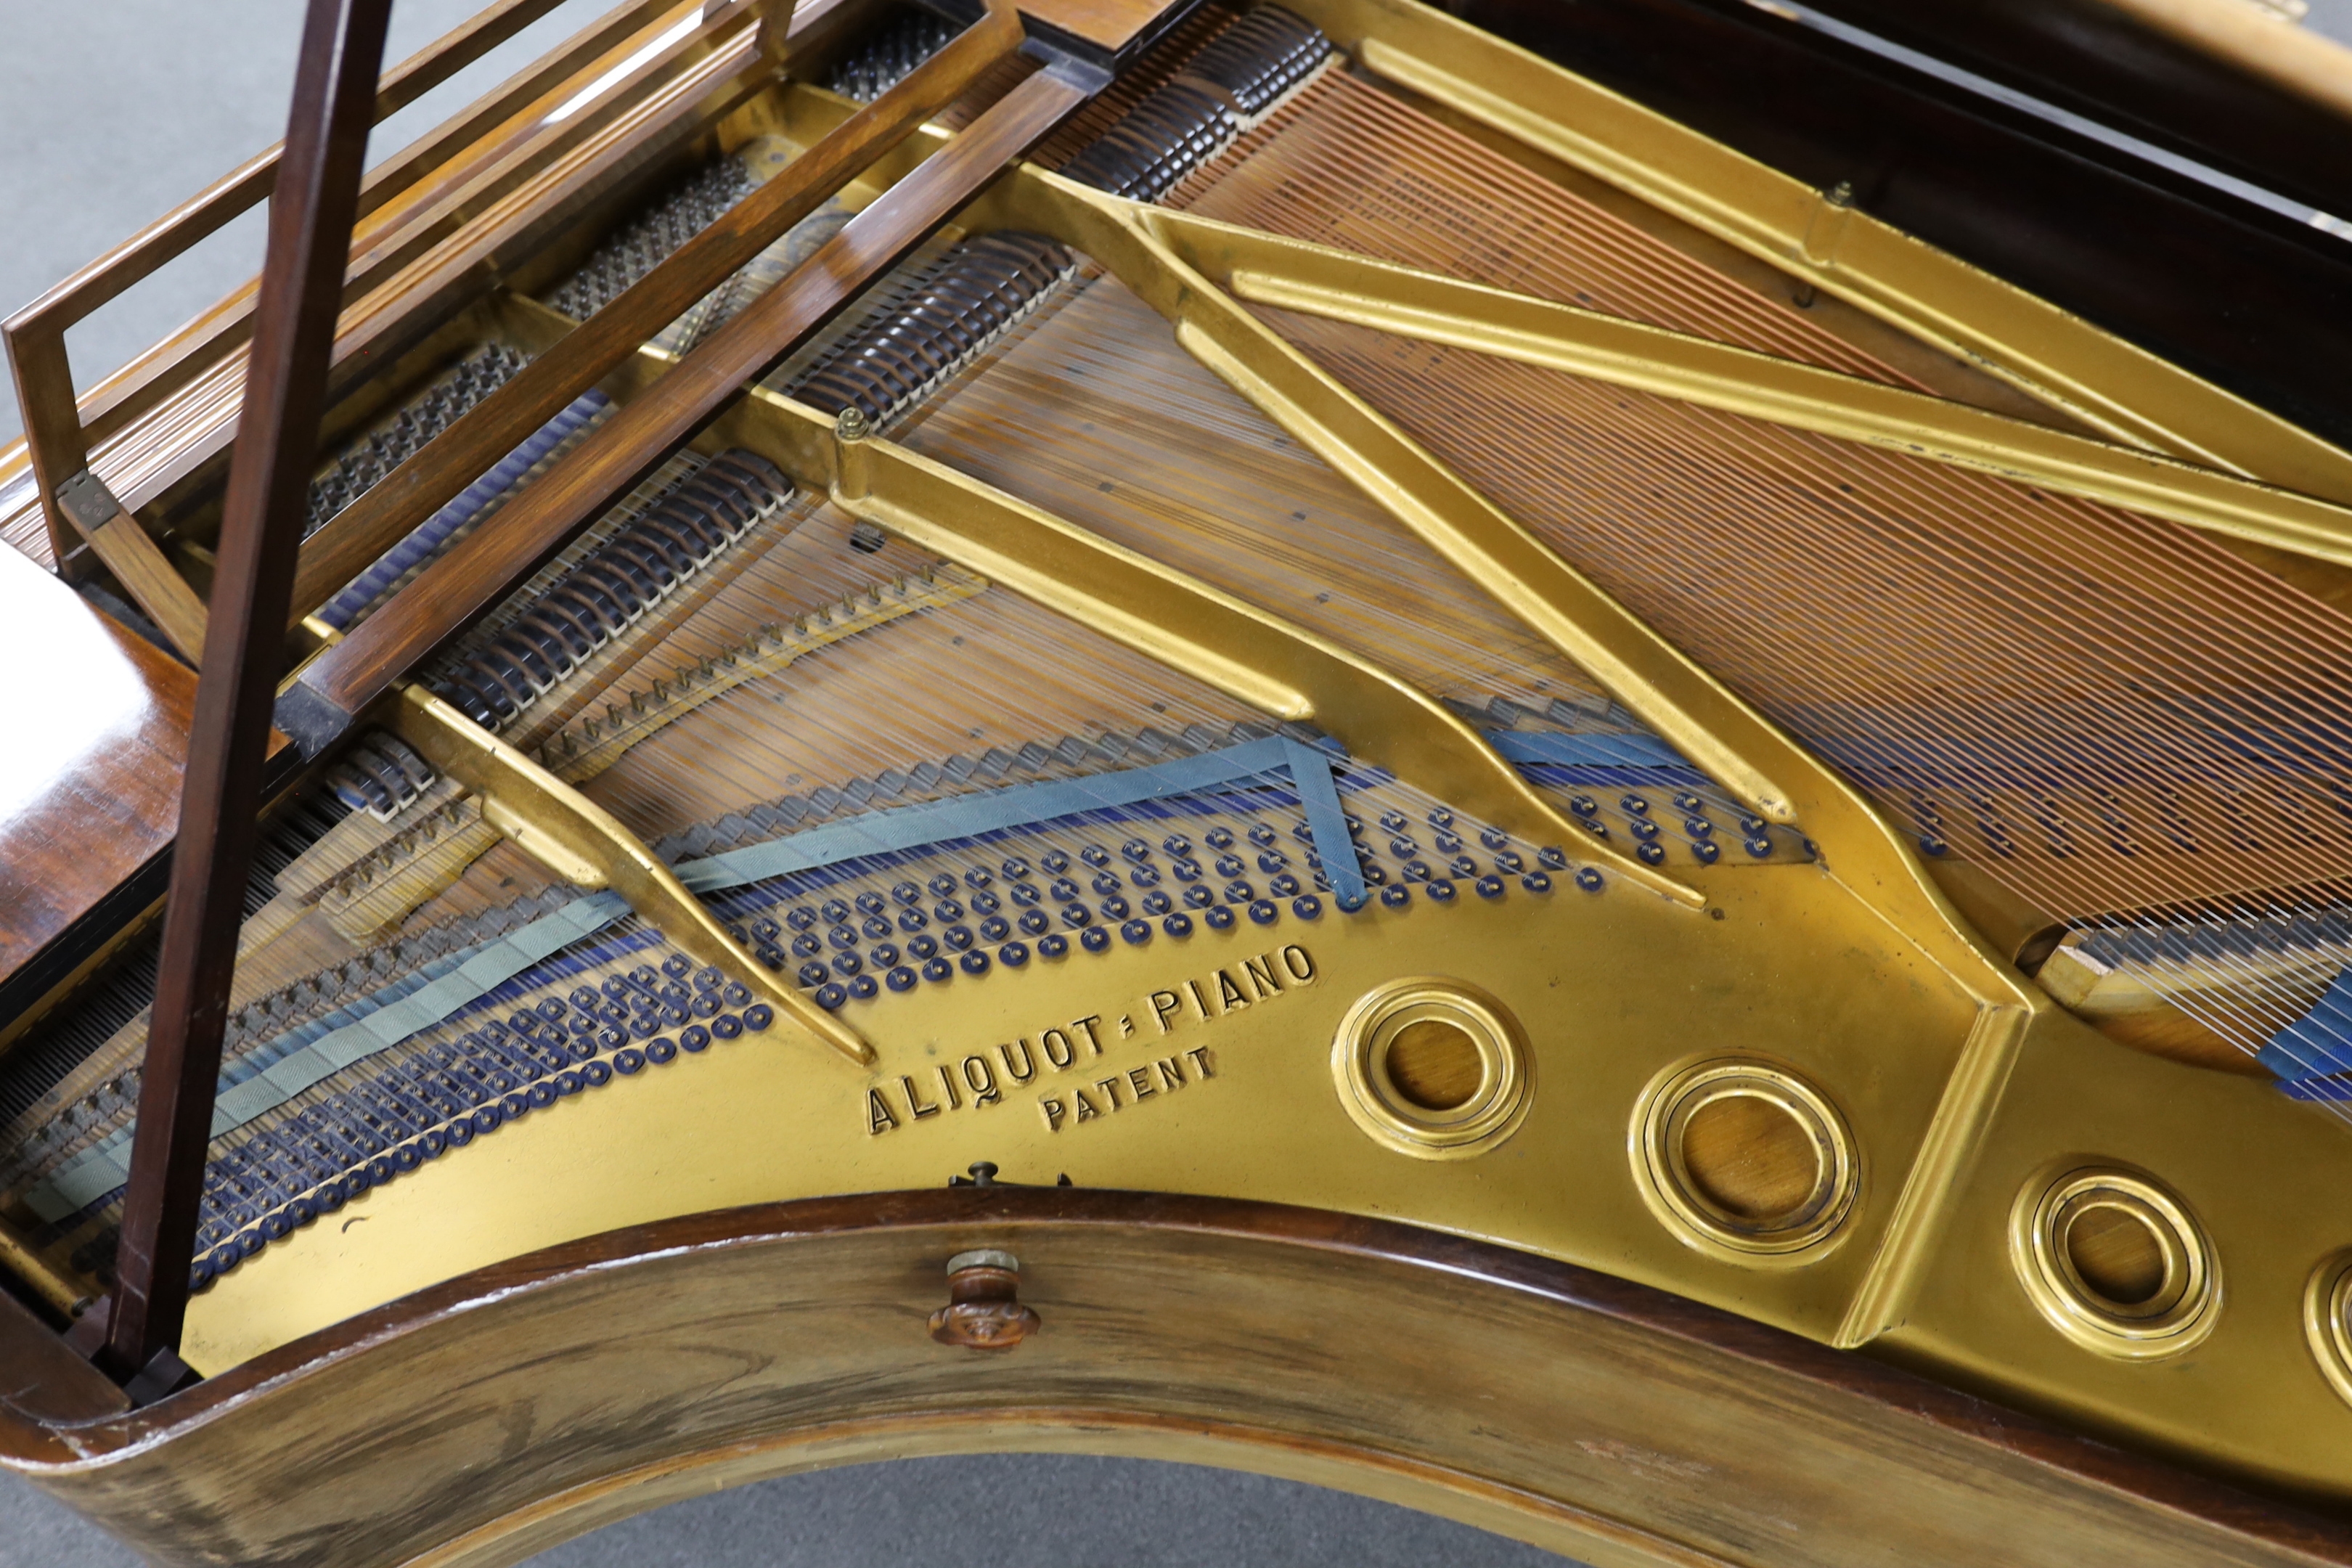 An early 20th century Blüthner rosewood and simulated rosewood Alquot Patent grand piano, Serial No. 72354, width 146cm, length 188cm